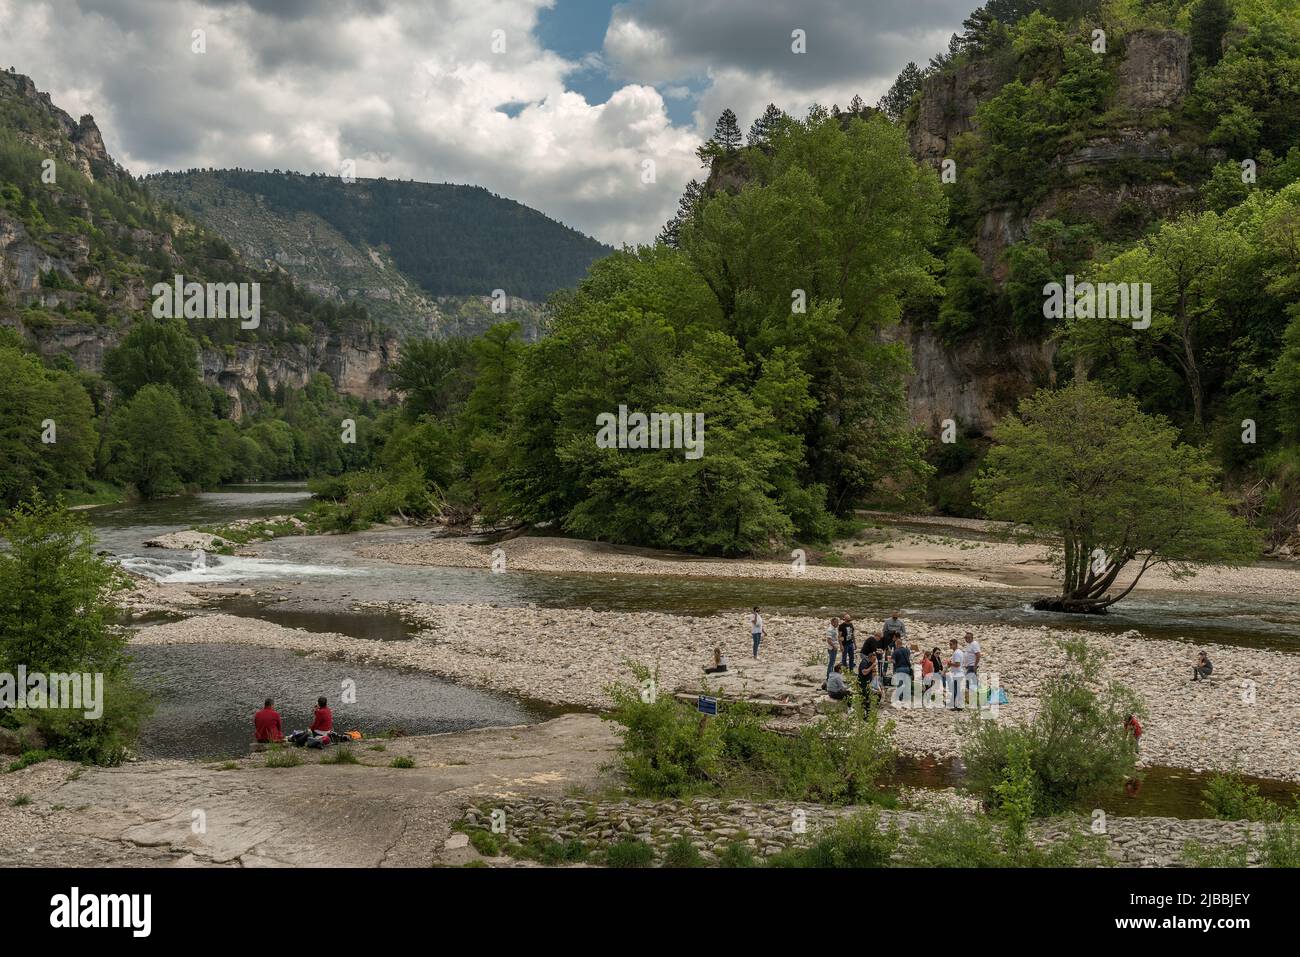 unidentified people on the banks of the Tarn River, Sainte-Enimie, Occitania, France Stock Photo